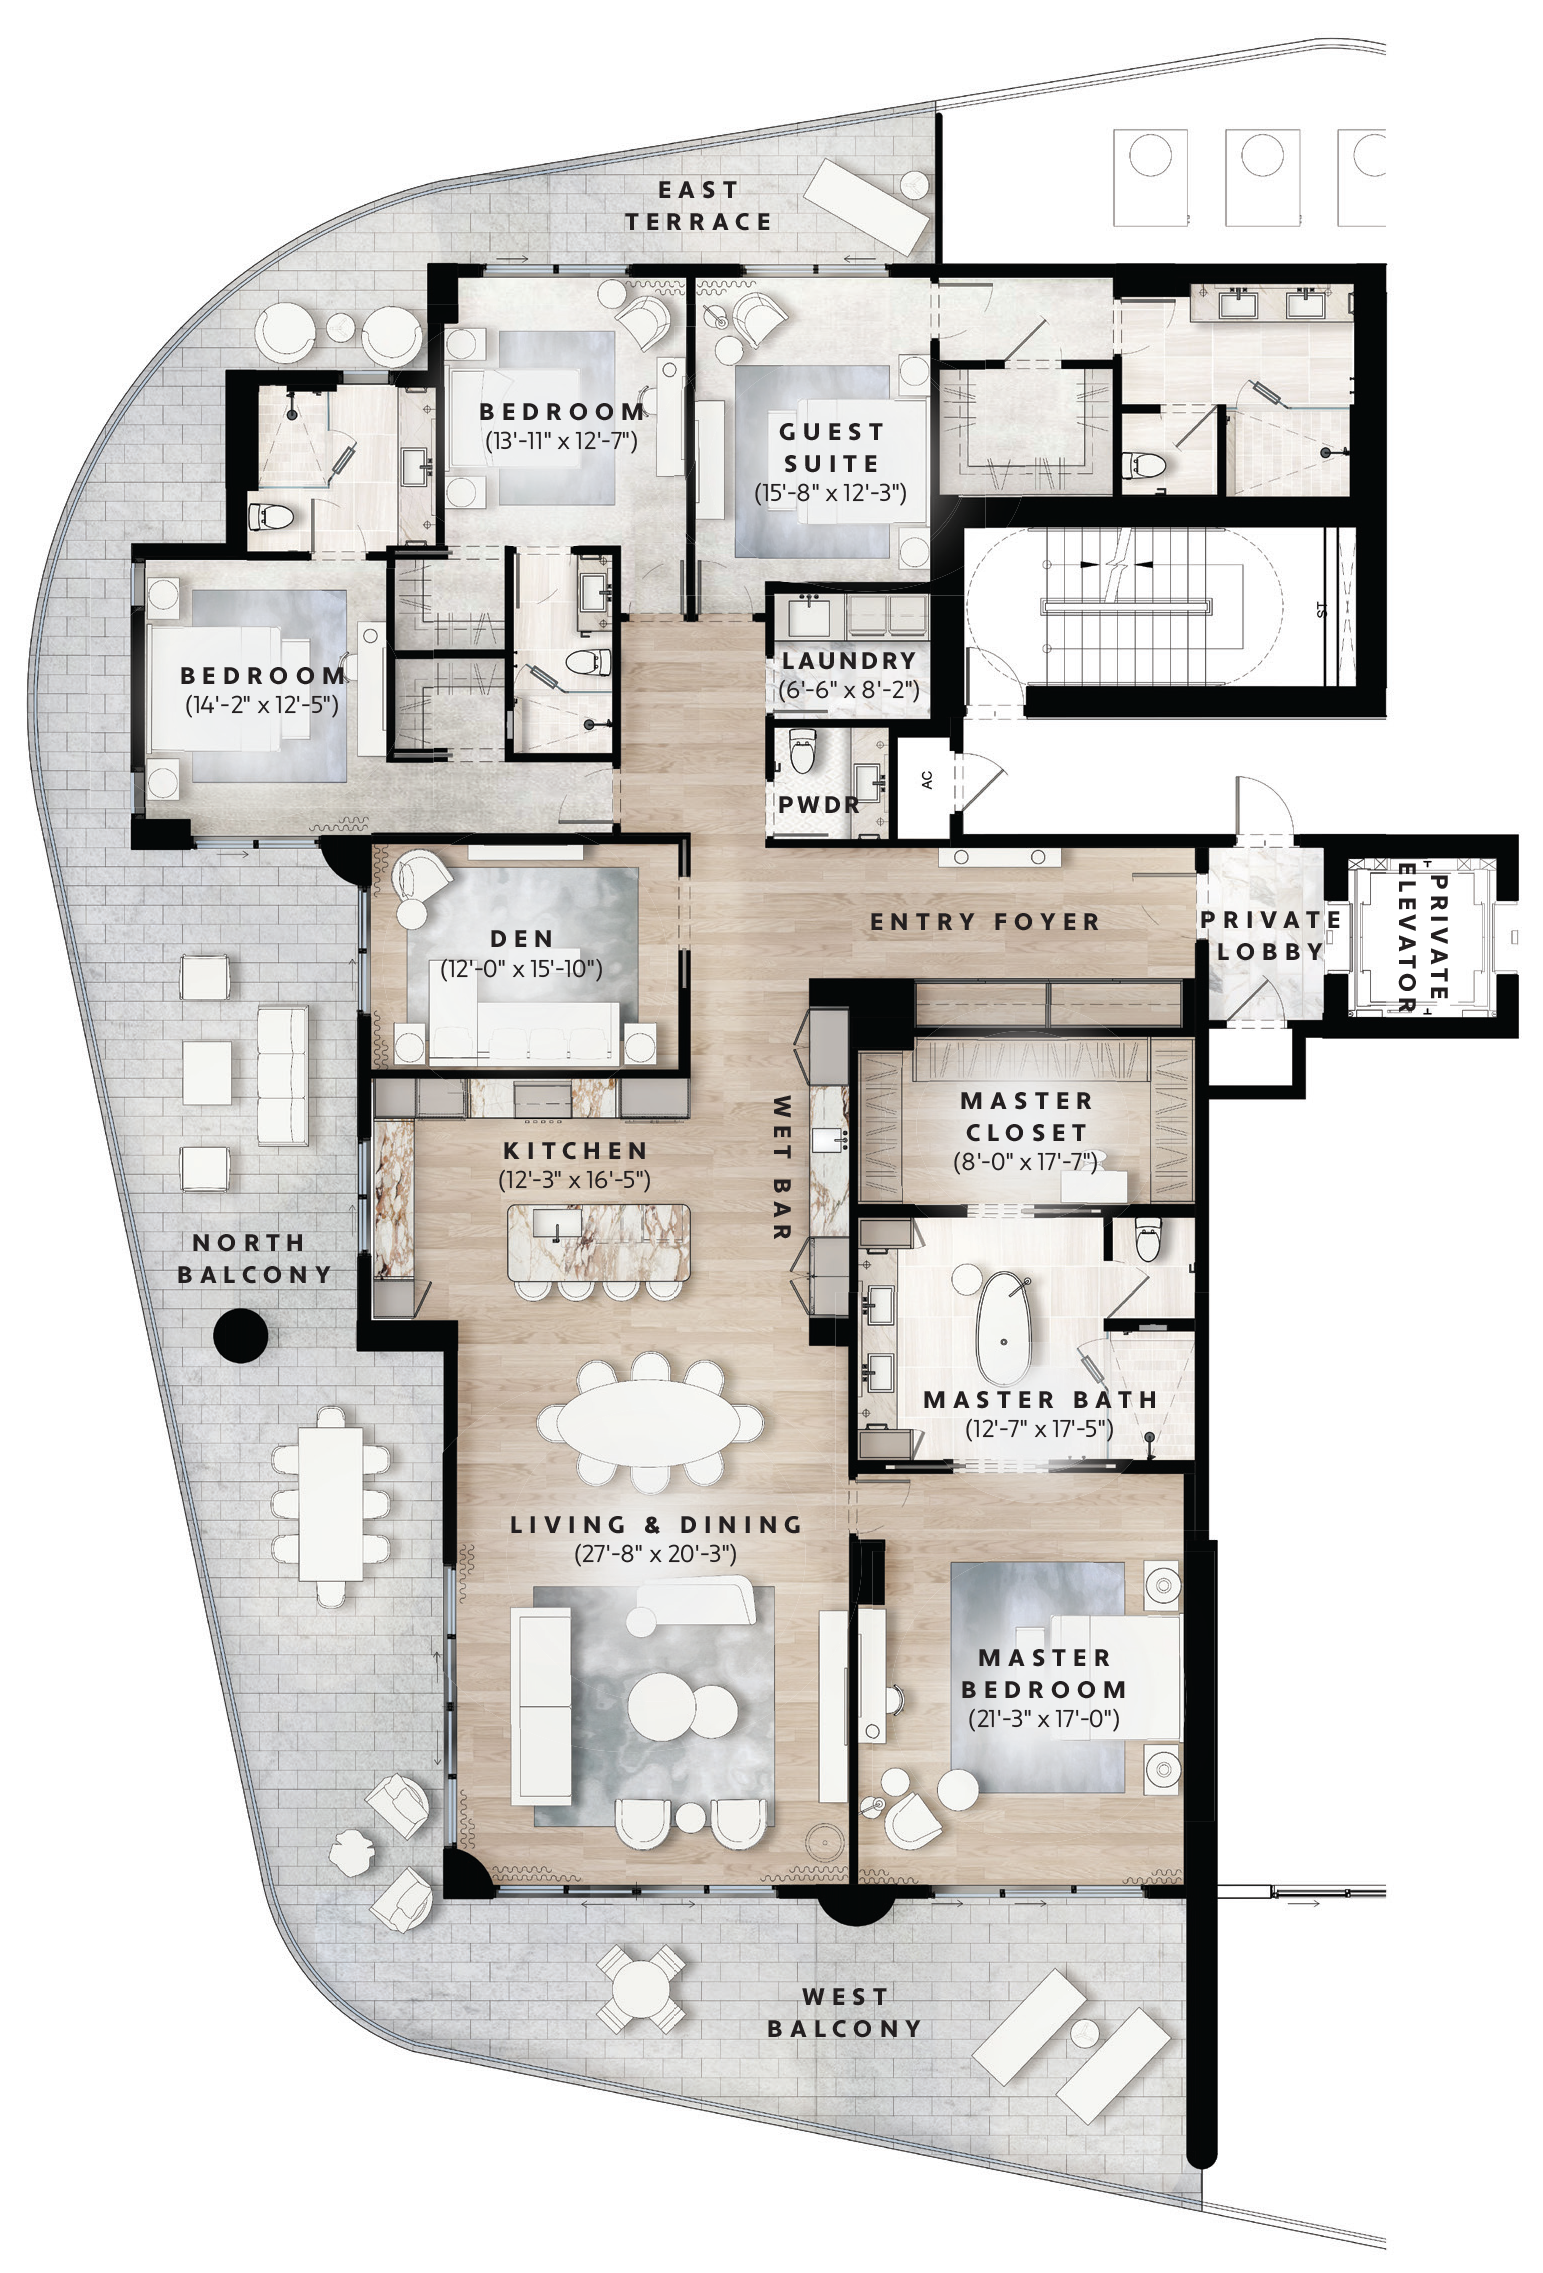 Labeled Floorplan for Residence 1 in the South Tower